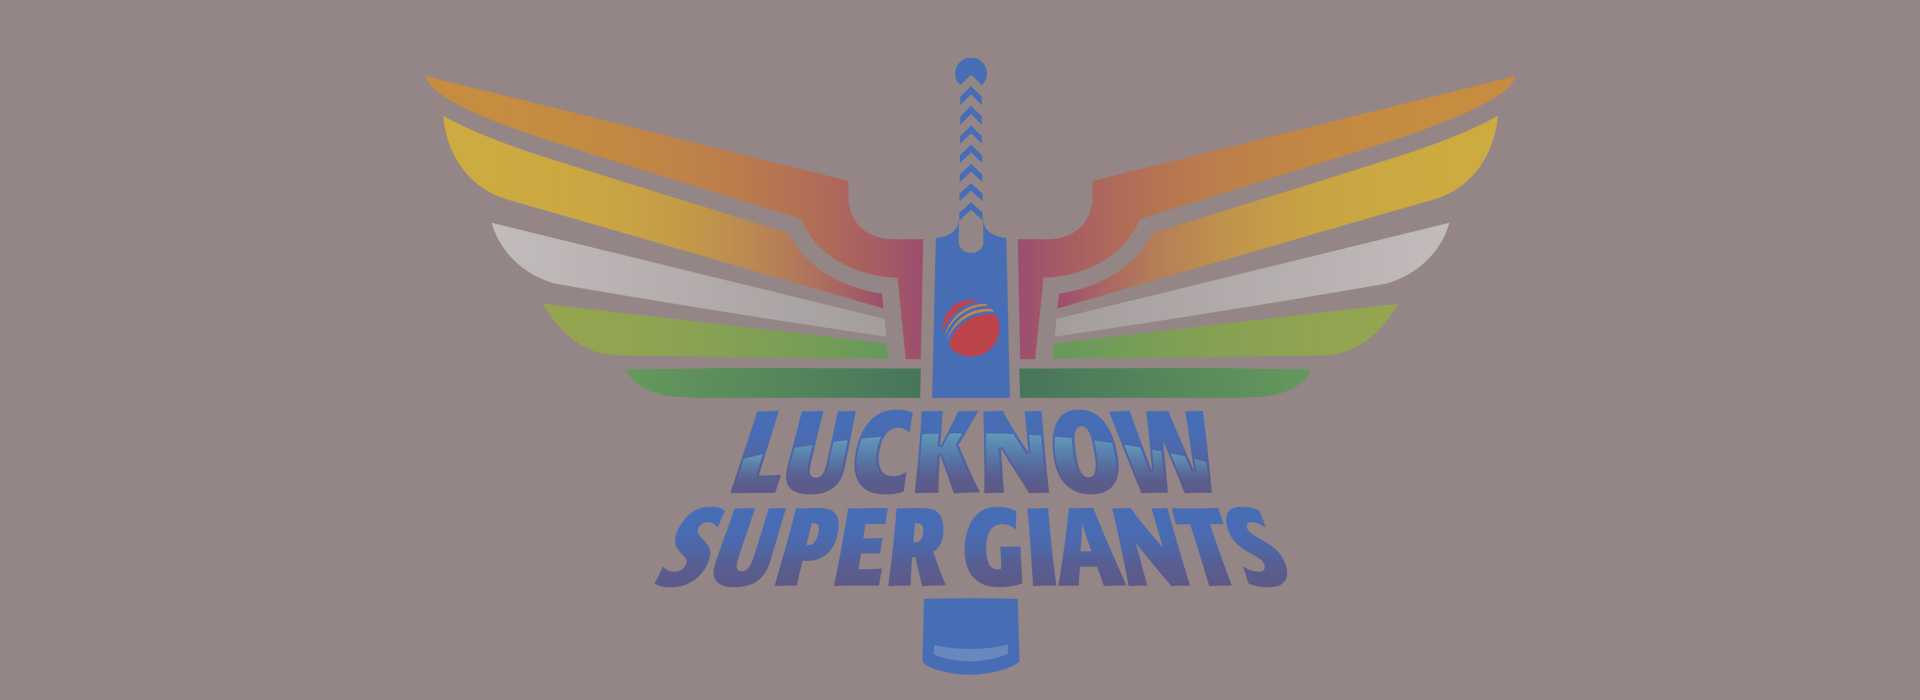 RPSG Group owns Lucknow Super Giants (LSG) cricket team based in Lucknow, Uttar Pradesh. The Lucknow franchise started operations  in 2021.